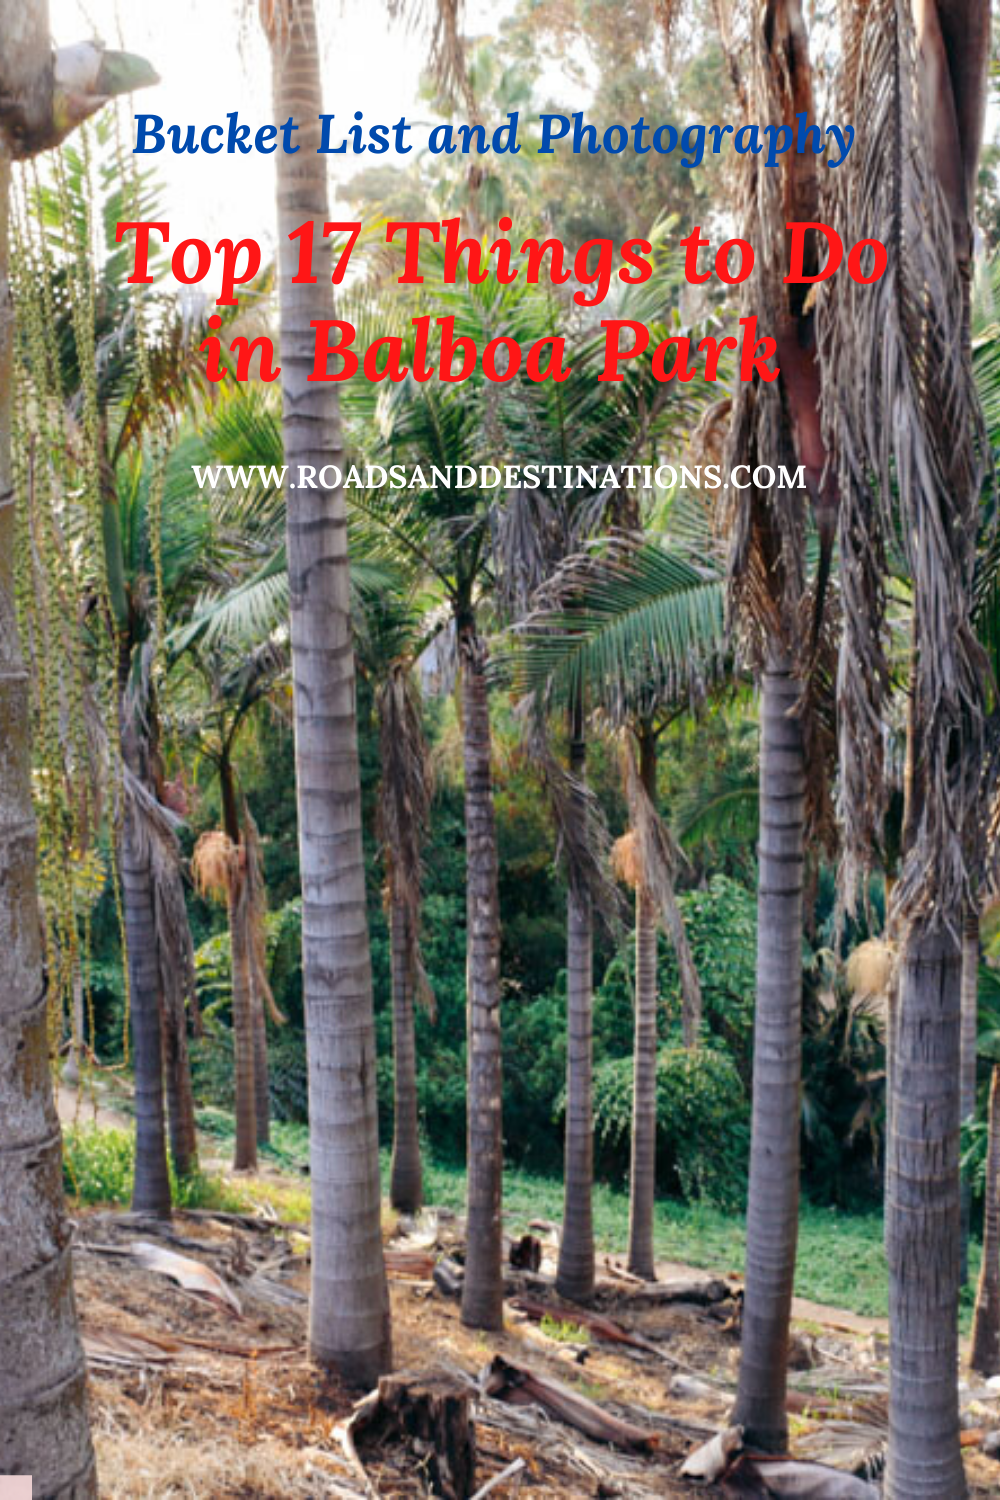 Top 17 Things to Do in Balboa Park. Bucket List and Photography - Roads and Destinations